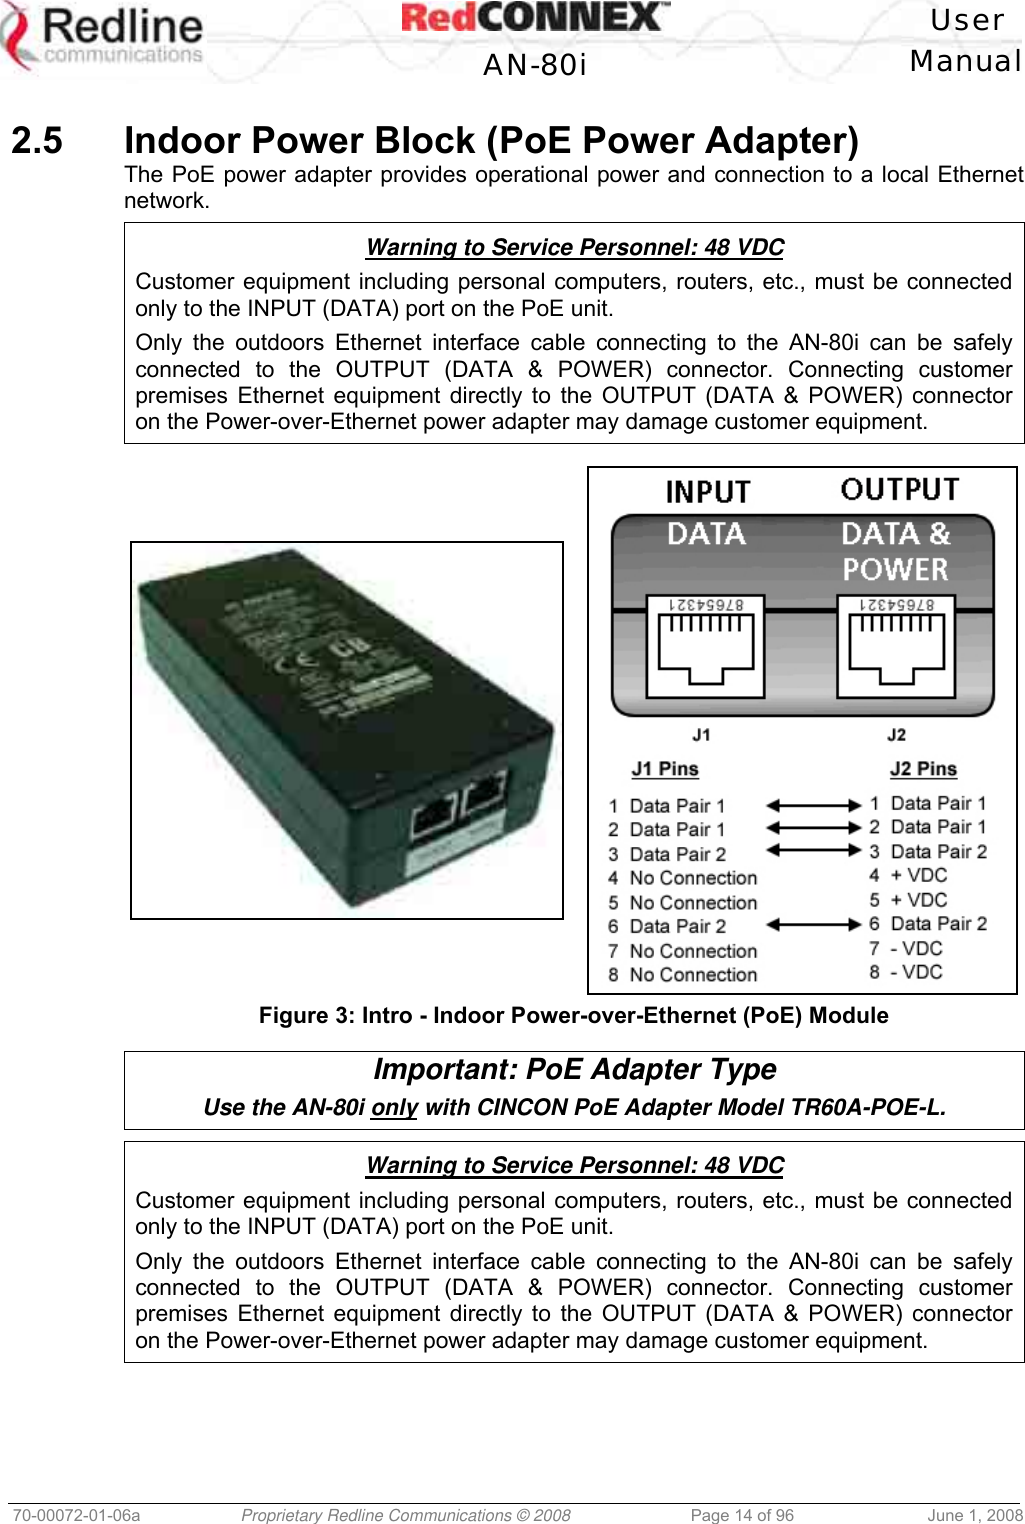   User  AN-80i Manual  70-00072-01-06a  Proprietary Redline Communications © 2008  Page 14 of 96  June 1, 2008  2.5  Indoor Power Block (PoE Power Adapter) The PoE power adapter provides operational power and connection to a local Ethernet network.  Warning to Service Personnel: 48 VDC Customer equipment including personal computers, routers, etc., must be connected only to the INPUT (DATA) port on the PoE unit.  Only the outdoors Ethernet interface cable connecting to the AN-80i can be safely connected to the OUTPUT (DATA &amp; POWER) connector. Connecting customer premises Ethernet equipment directly to the OUTPUT (DATA &amp; POWER) connector on the Power-over-Ethernet power adapter may damage customer equipment.   Figure 3: Intro - Indoor Power-over-Ethernet (PoE) Module  Important: PoE Adapter Type Use the AN-80i only with CINCON PoE Adapter Model TR60A-POE-L.   Warning to Service Personnel: 48 VDC Customer equipment including personal computers, routers, etc., must be connected only to the INPUT (DATA) port on the PoE unit.  Only the outdoors Ethernet interface cable connecting to the AN-80i can be safely connected to the OUTPUT (DATA &amp; POWER) connector. Connecting customer premises Ethernet equipment directly to the OUTPUT (DATA &amp; POWER) connector on the Power-over-Ethernet power adapter may damage customer equipment.  